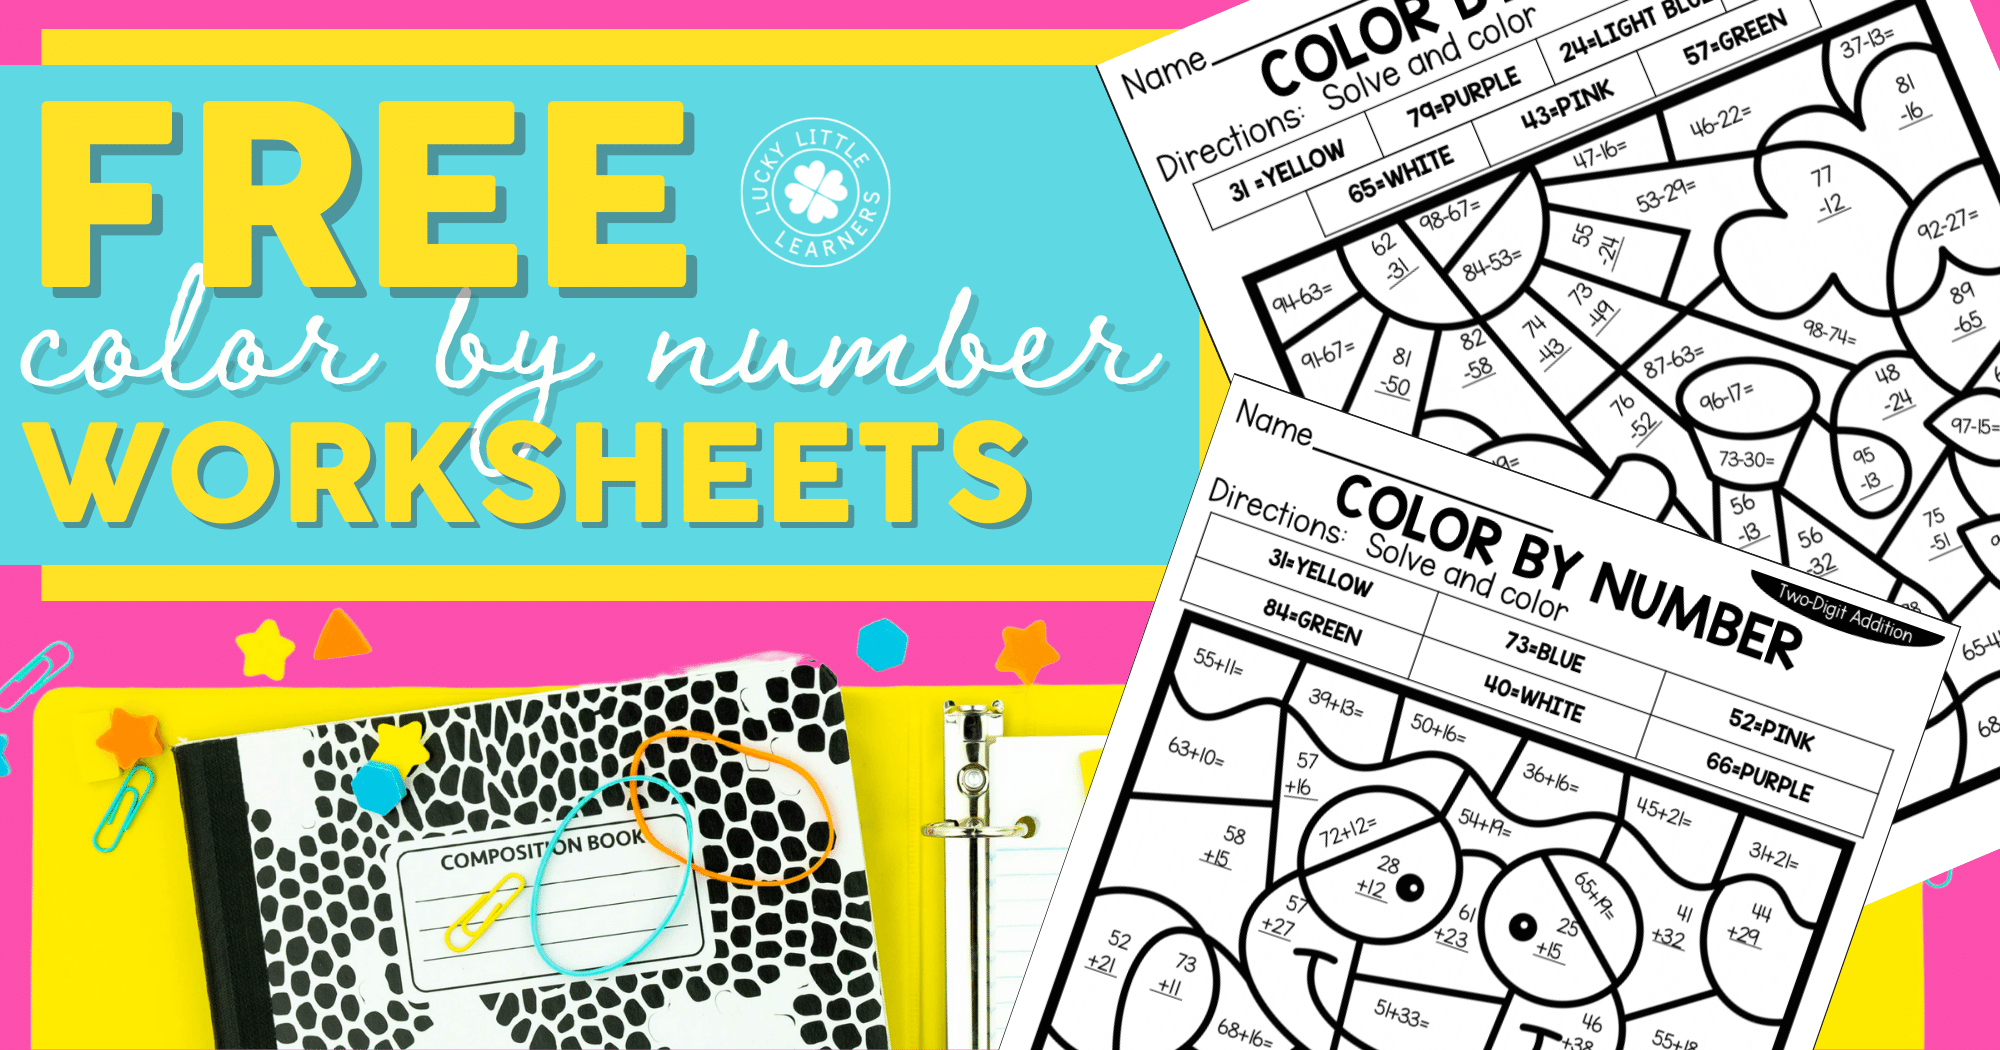 5 Ways To Use These Free Colornumber Sheets In 2Nd Grade inside Free Printable Math Coloring Worksheets for 2nd Grade